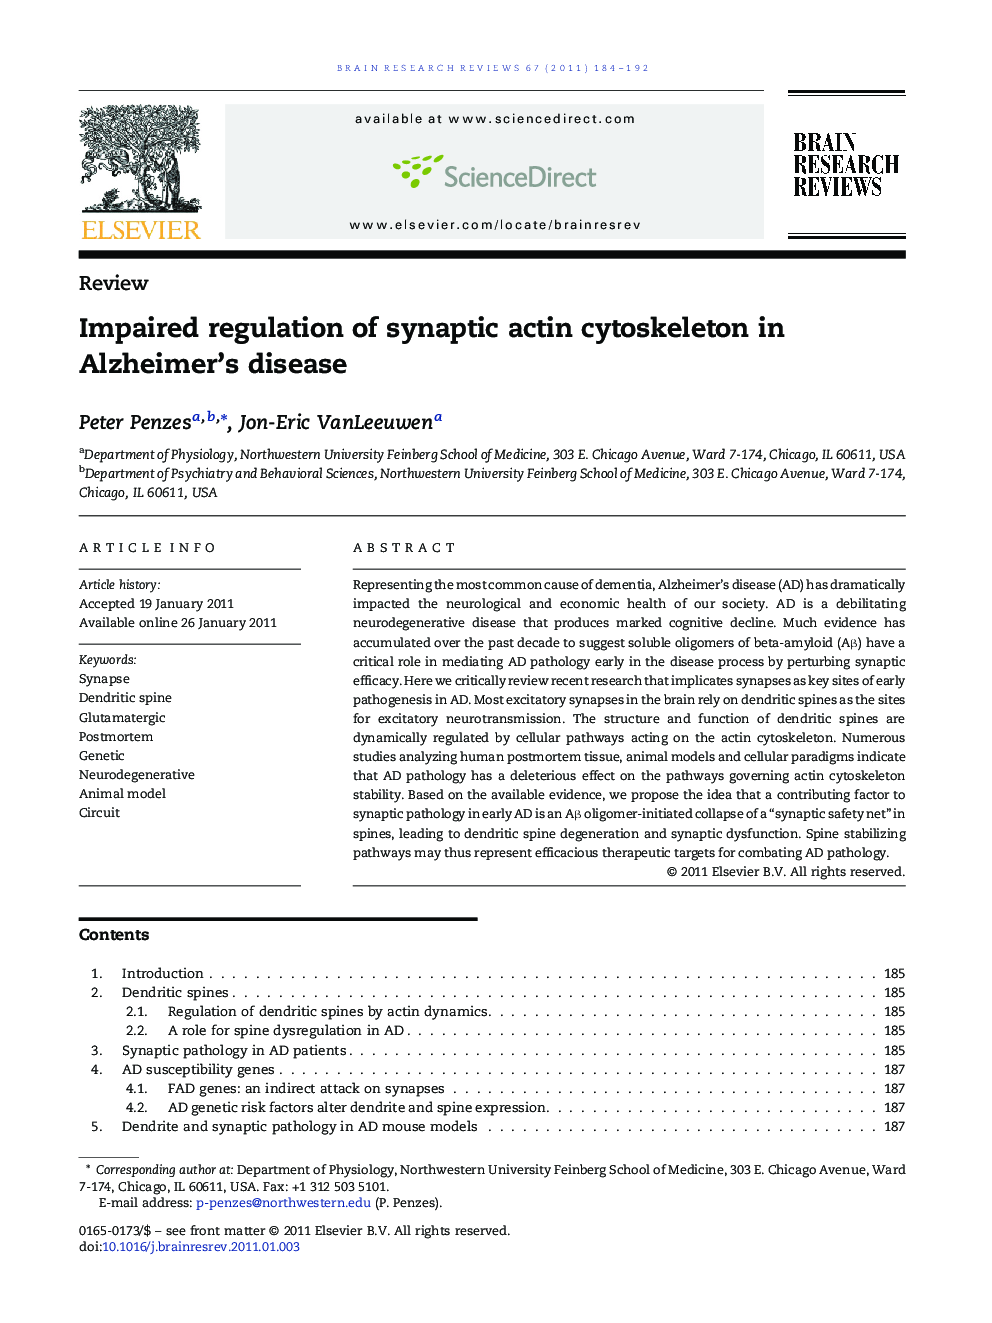 ReviewImpaired regulation of synaptic actin cytoskeleton in Alzheimer's disease